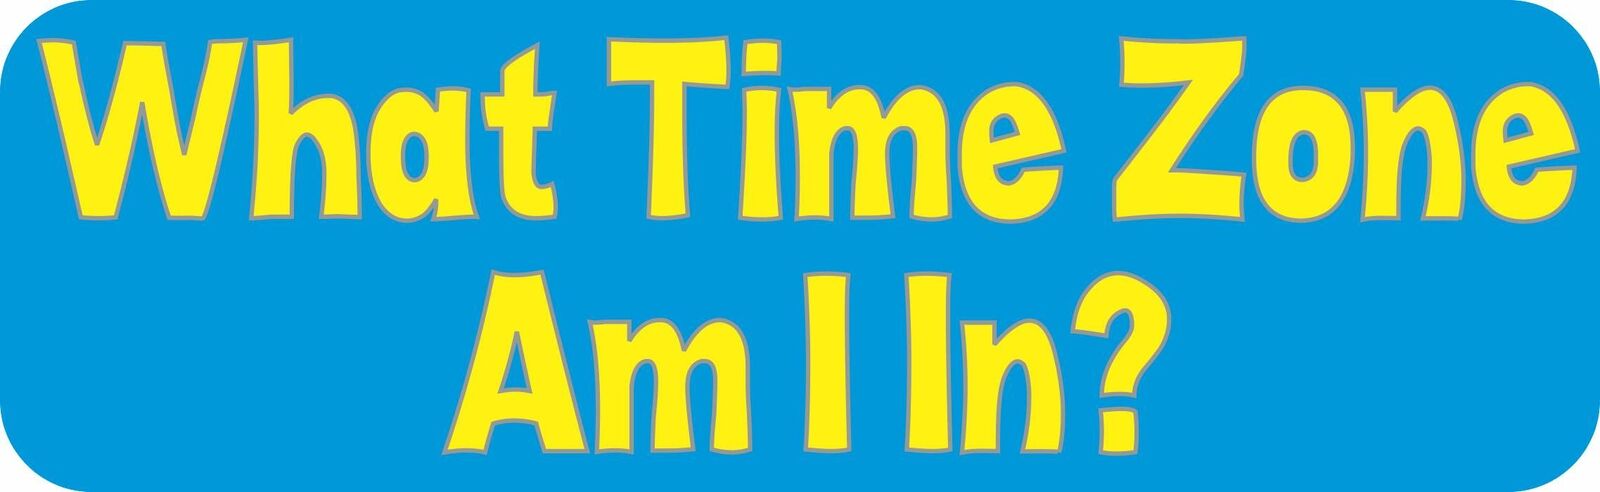 10x3 What Time Zone Am I In Bumper Magnet Magnetic Signs Travel Magnets Car Sign